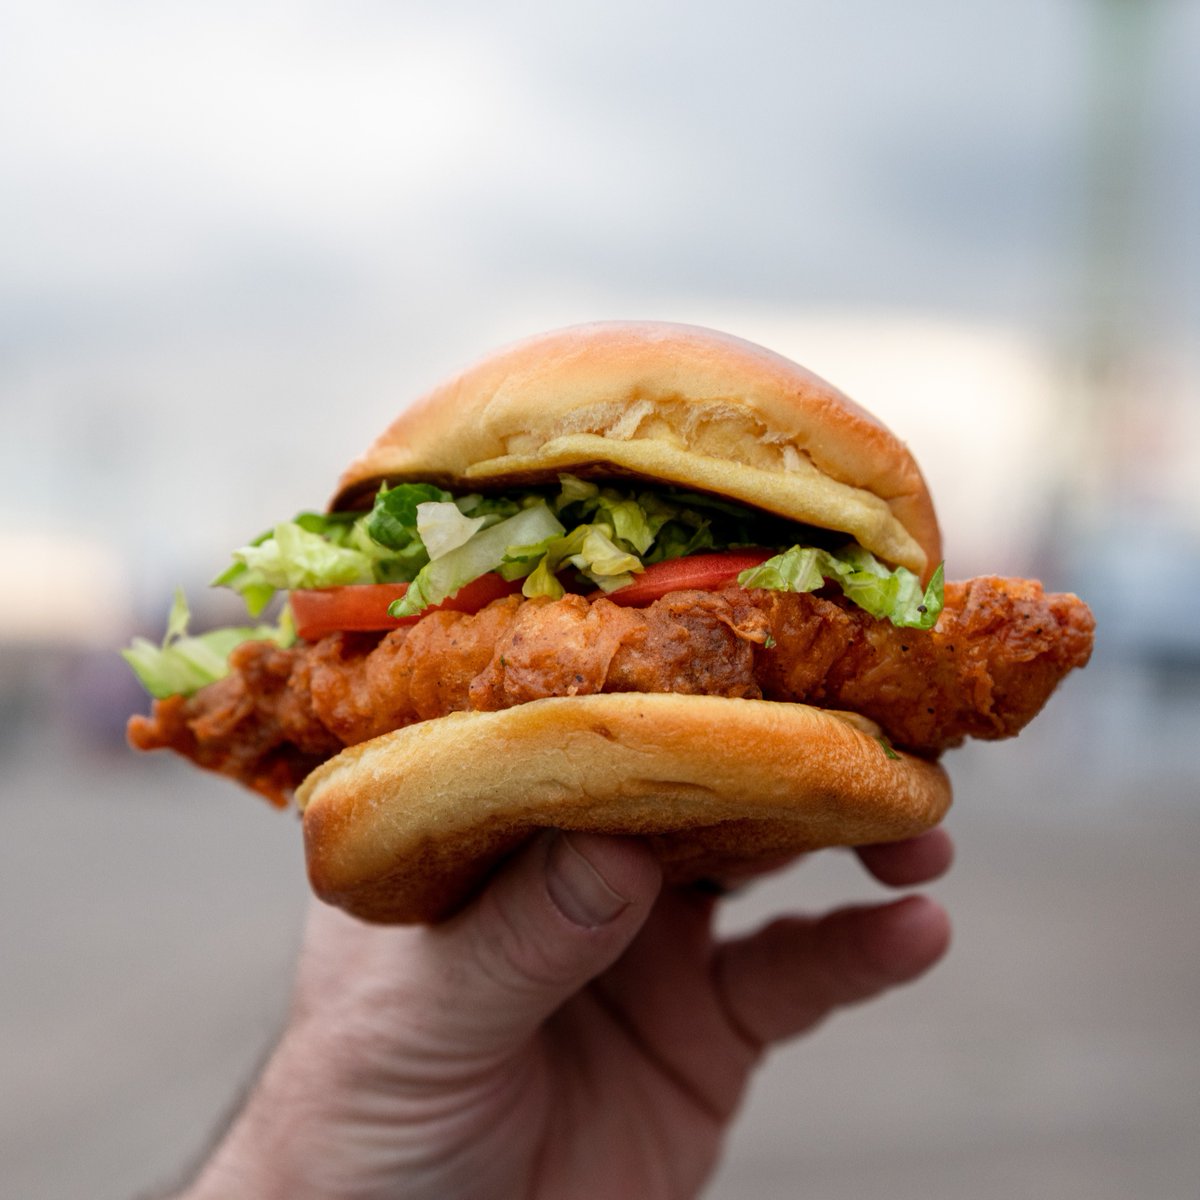 Get your chicken sandwiches in the air for #NationalSandwichDay 

#sandwich #chickensandwich #friedchicken #foodintheair